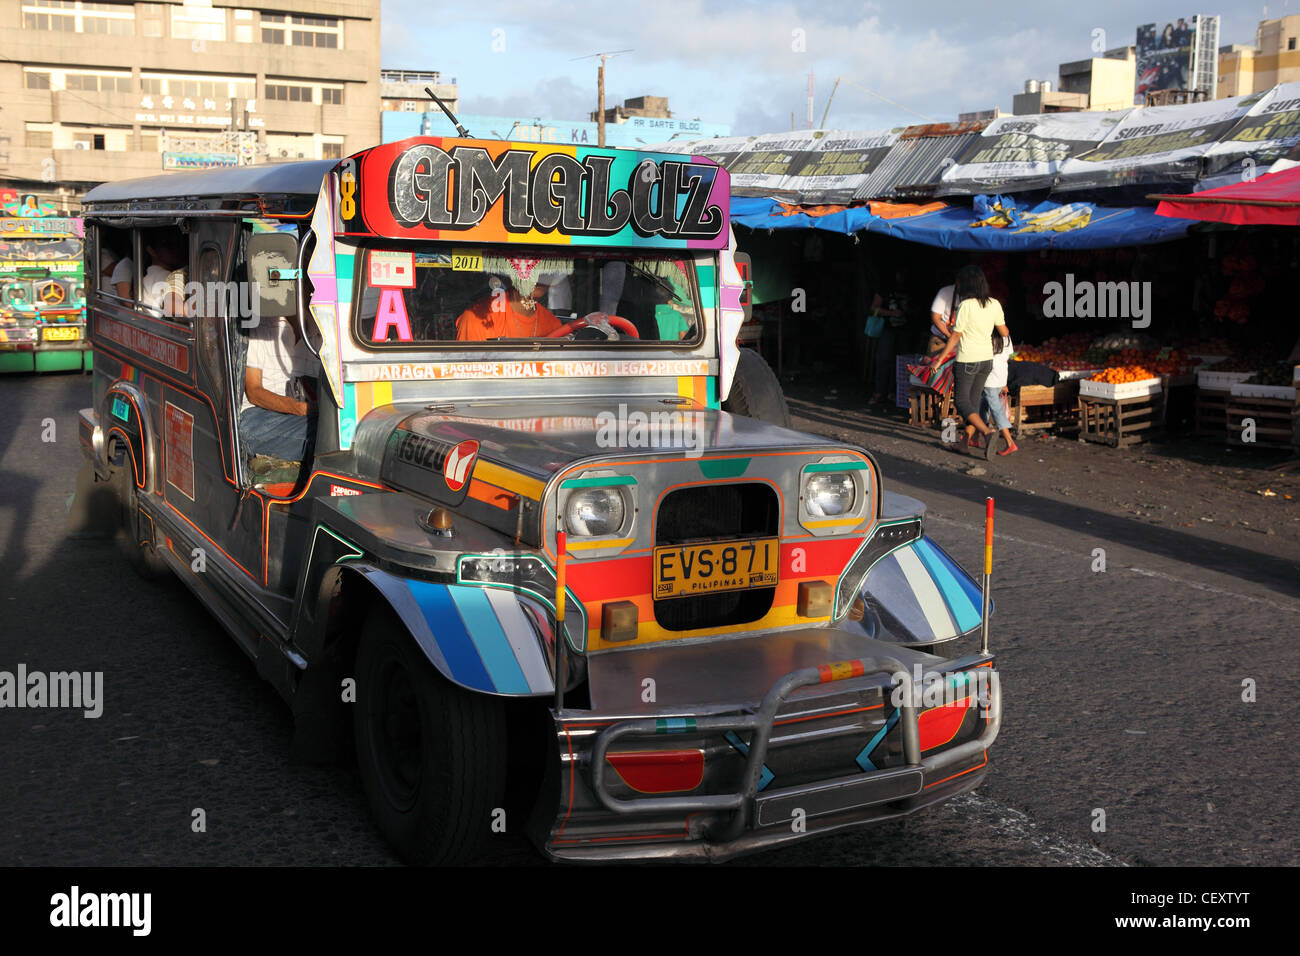 Colorful jeepney bus in the town center. Legaspi, Luzon, Albay, Bicol, Philippines, South-East Asia, Asia Stock Photo